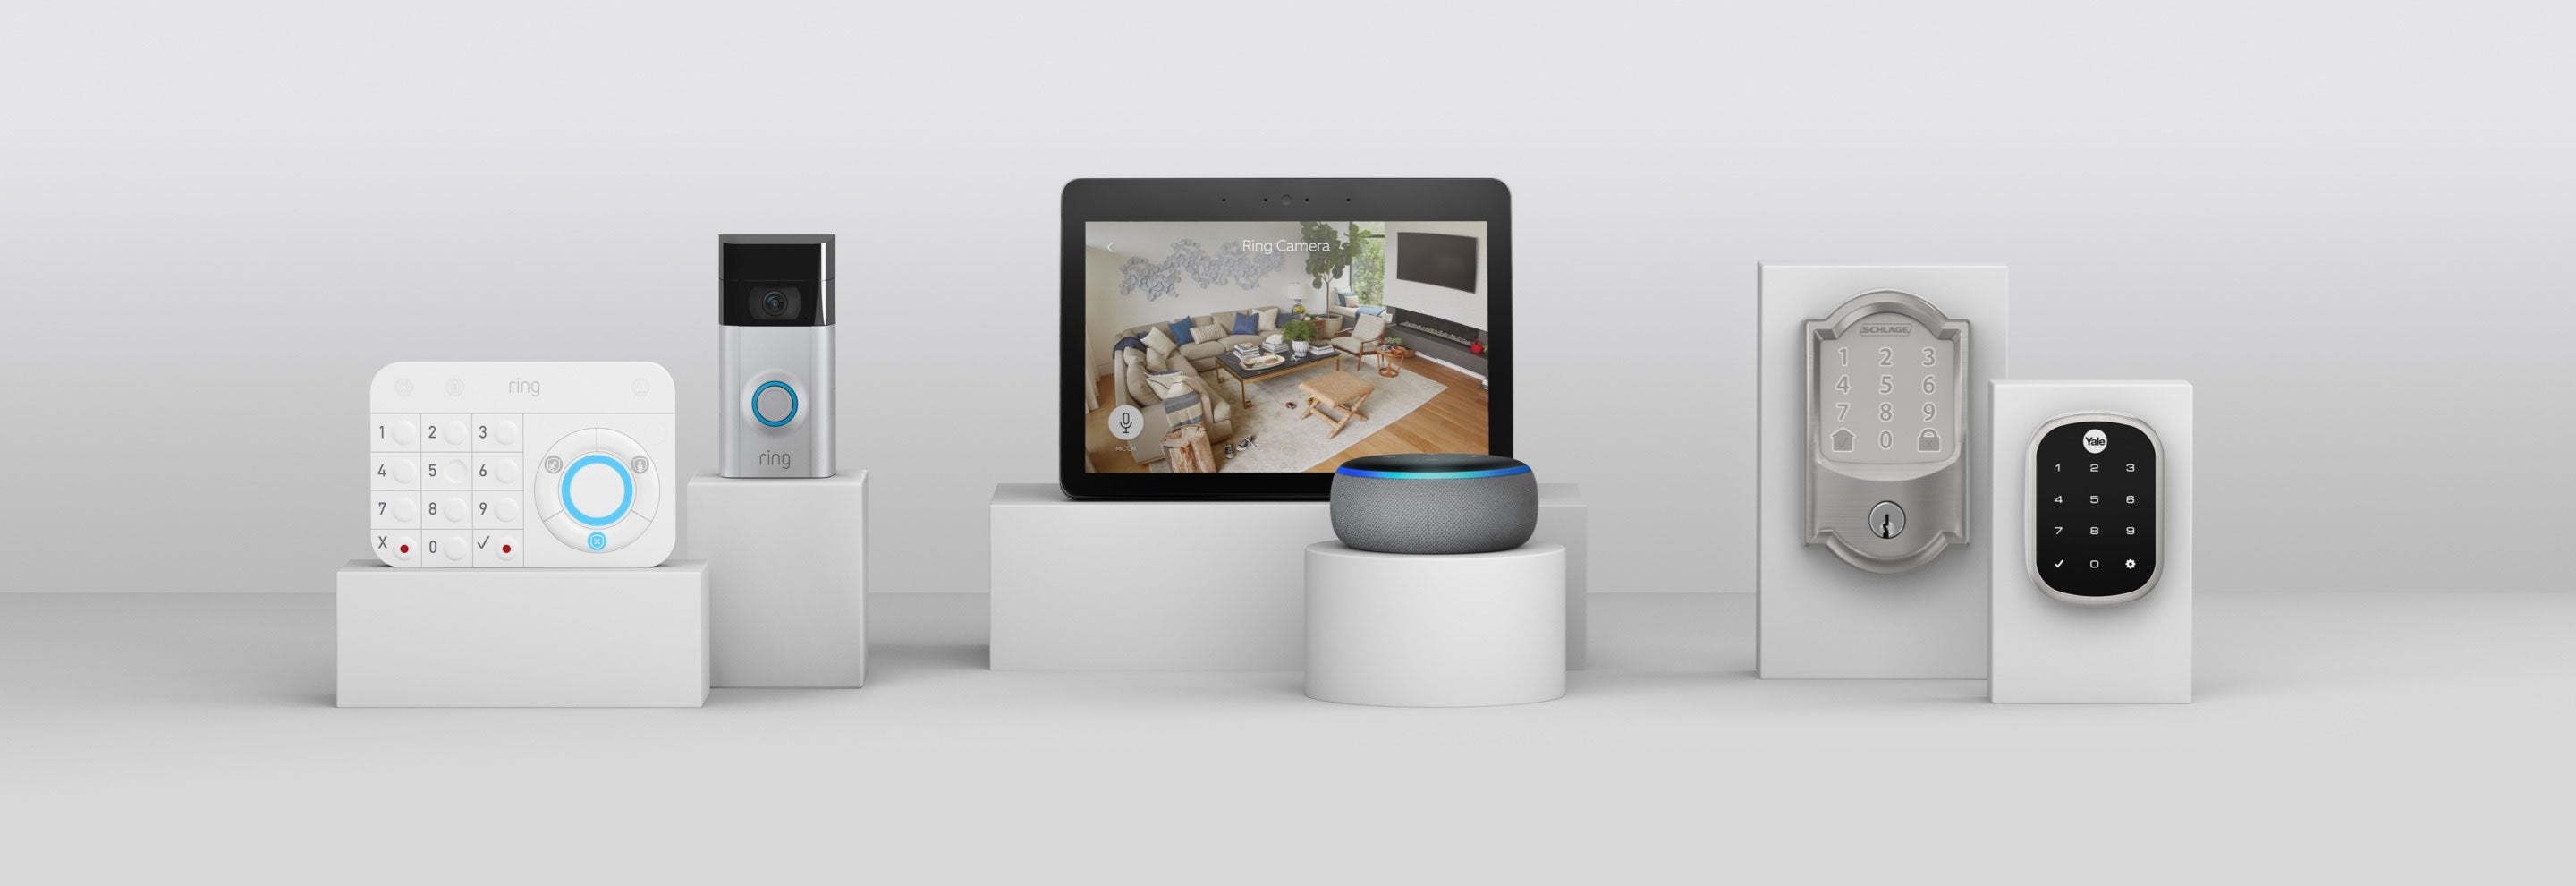 Ring Indoor Cam connects to other smart devices like Alexa, Echo, Echo Show, and smart locks